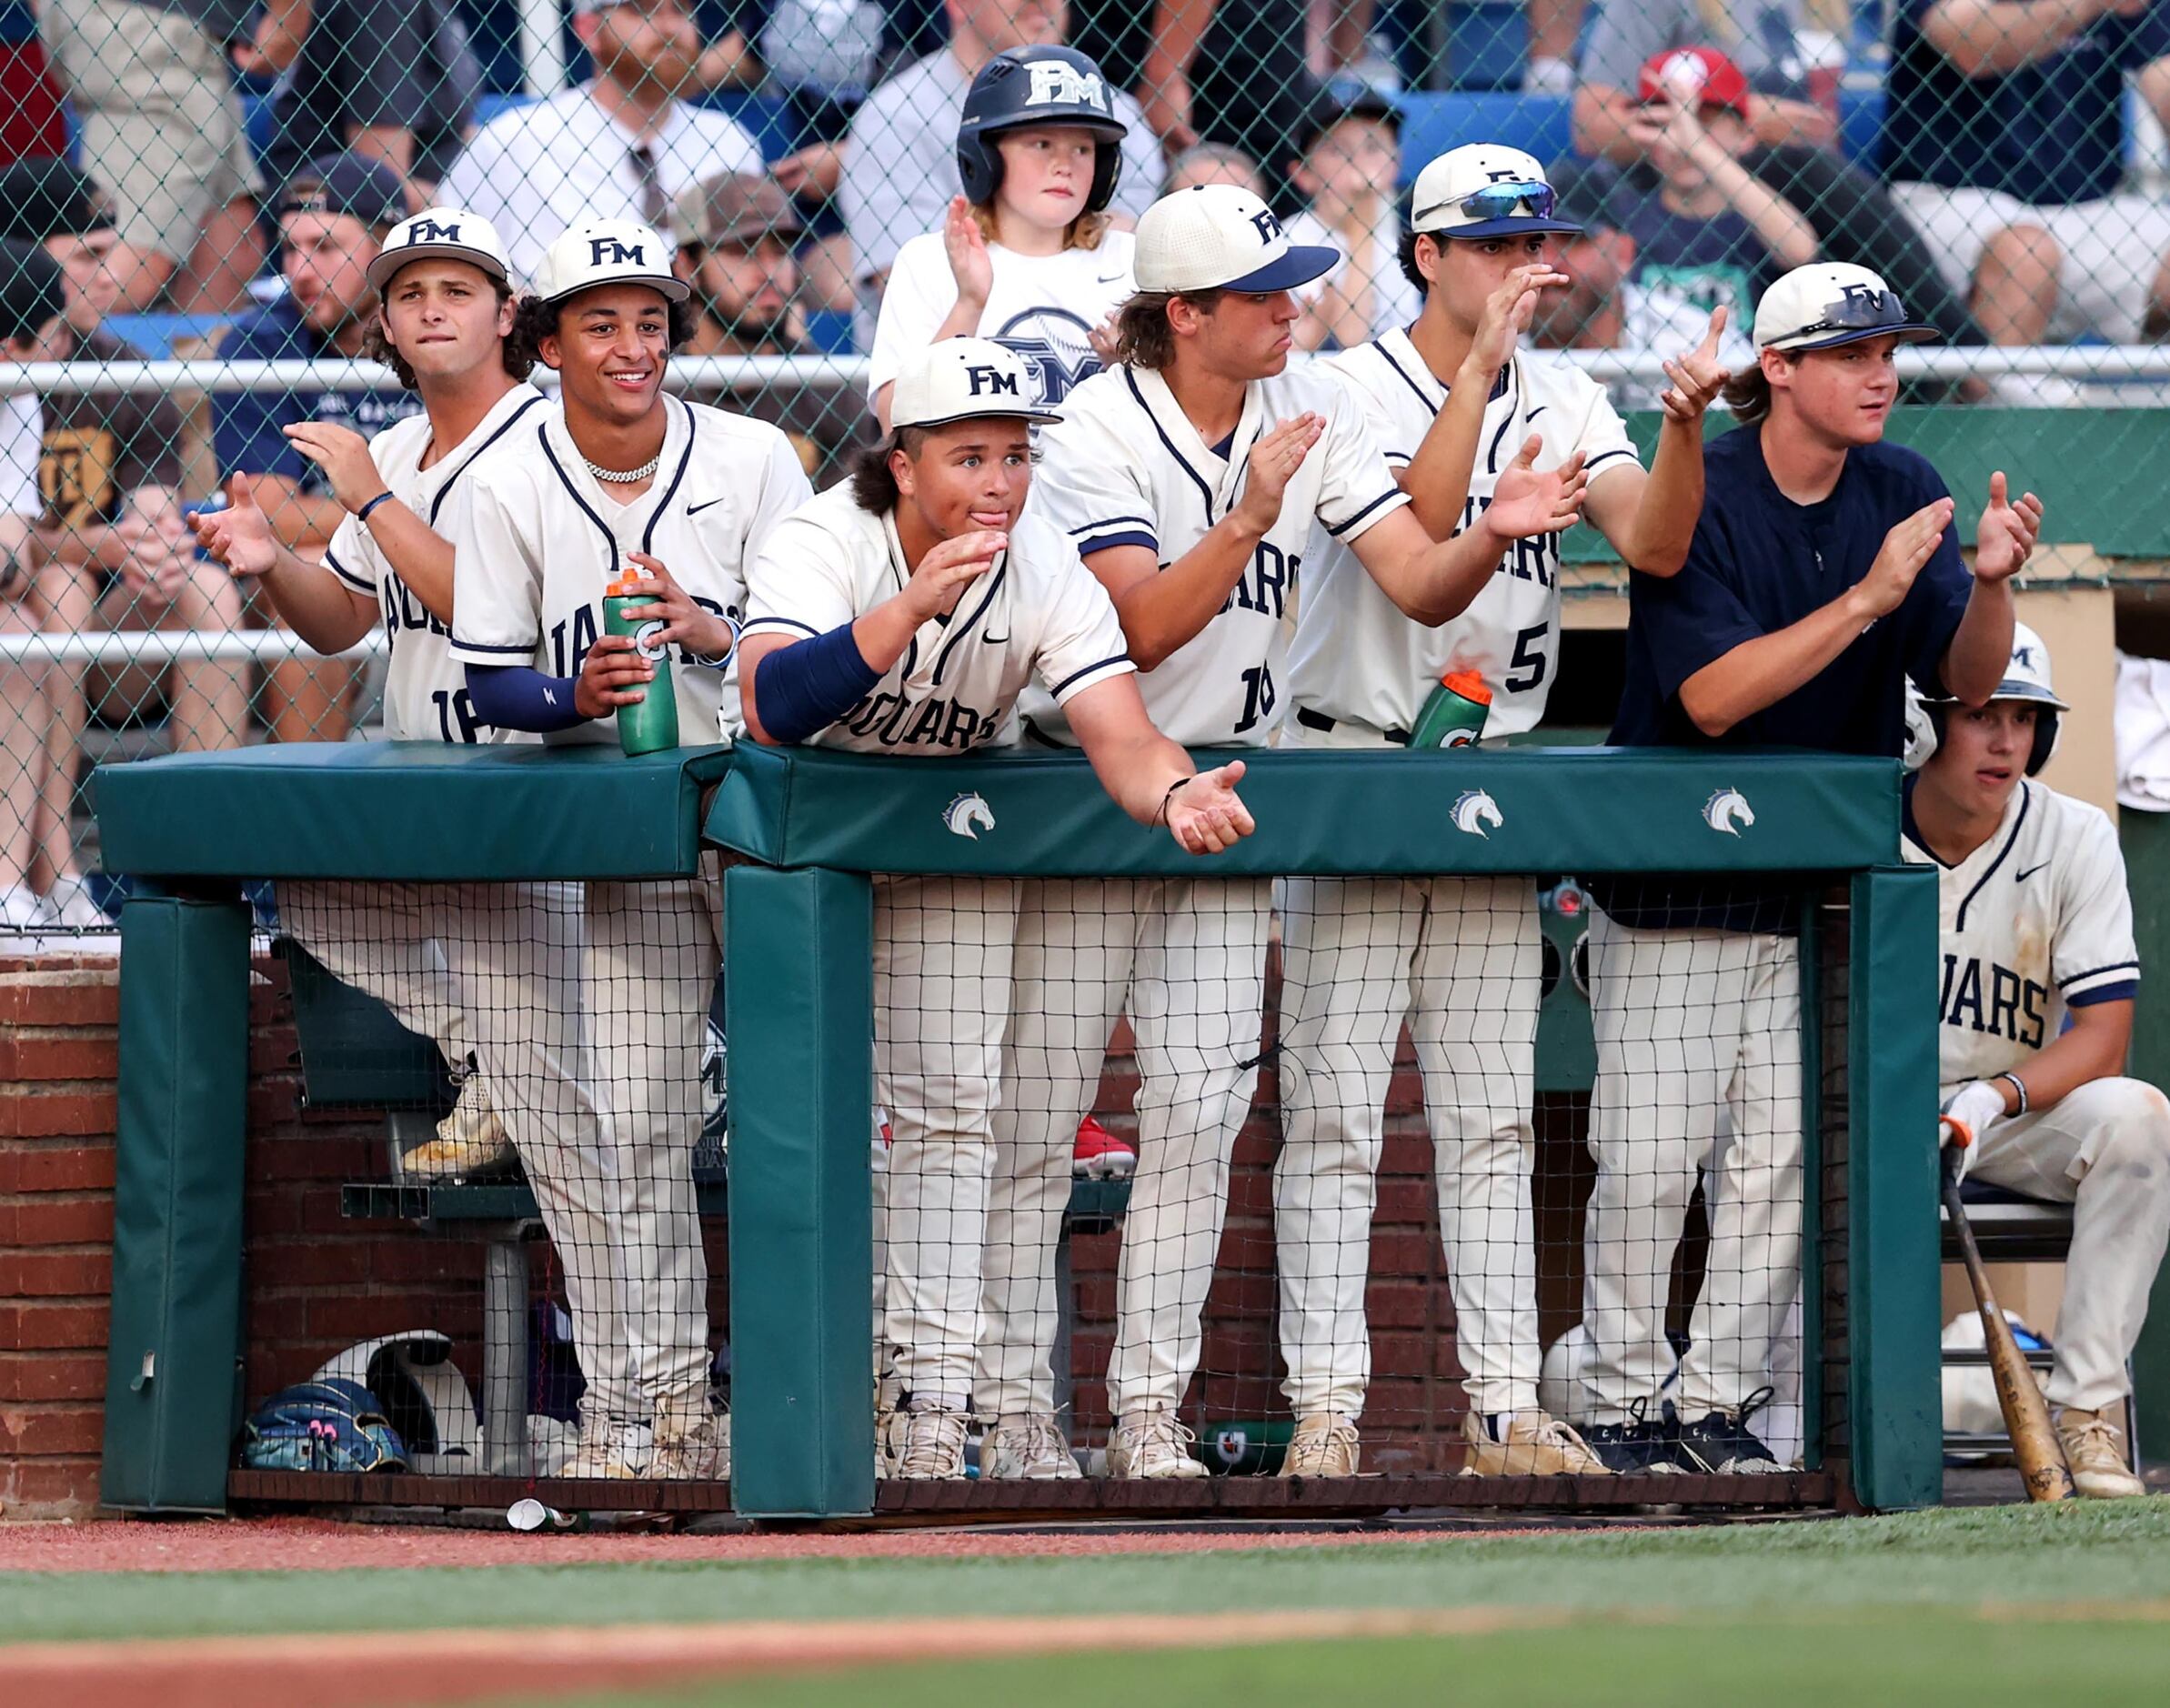 The Flower Mound bench cheer on their team against Denton Guyer during Game 1 of a best-of-3...